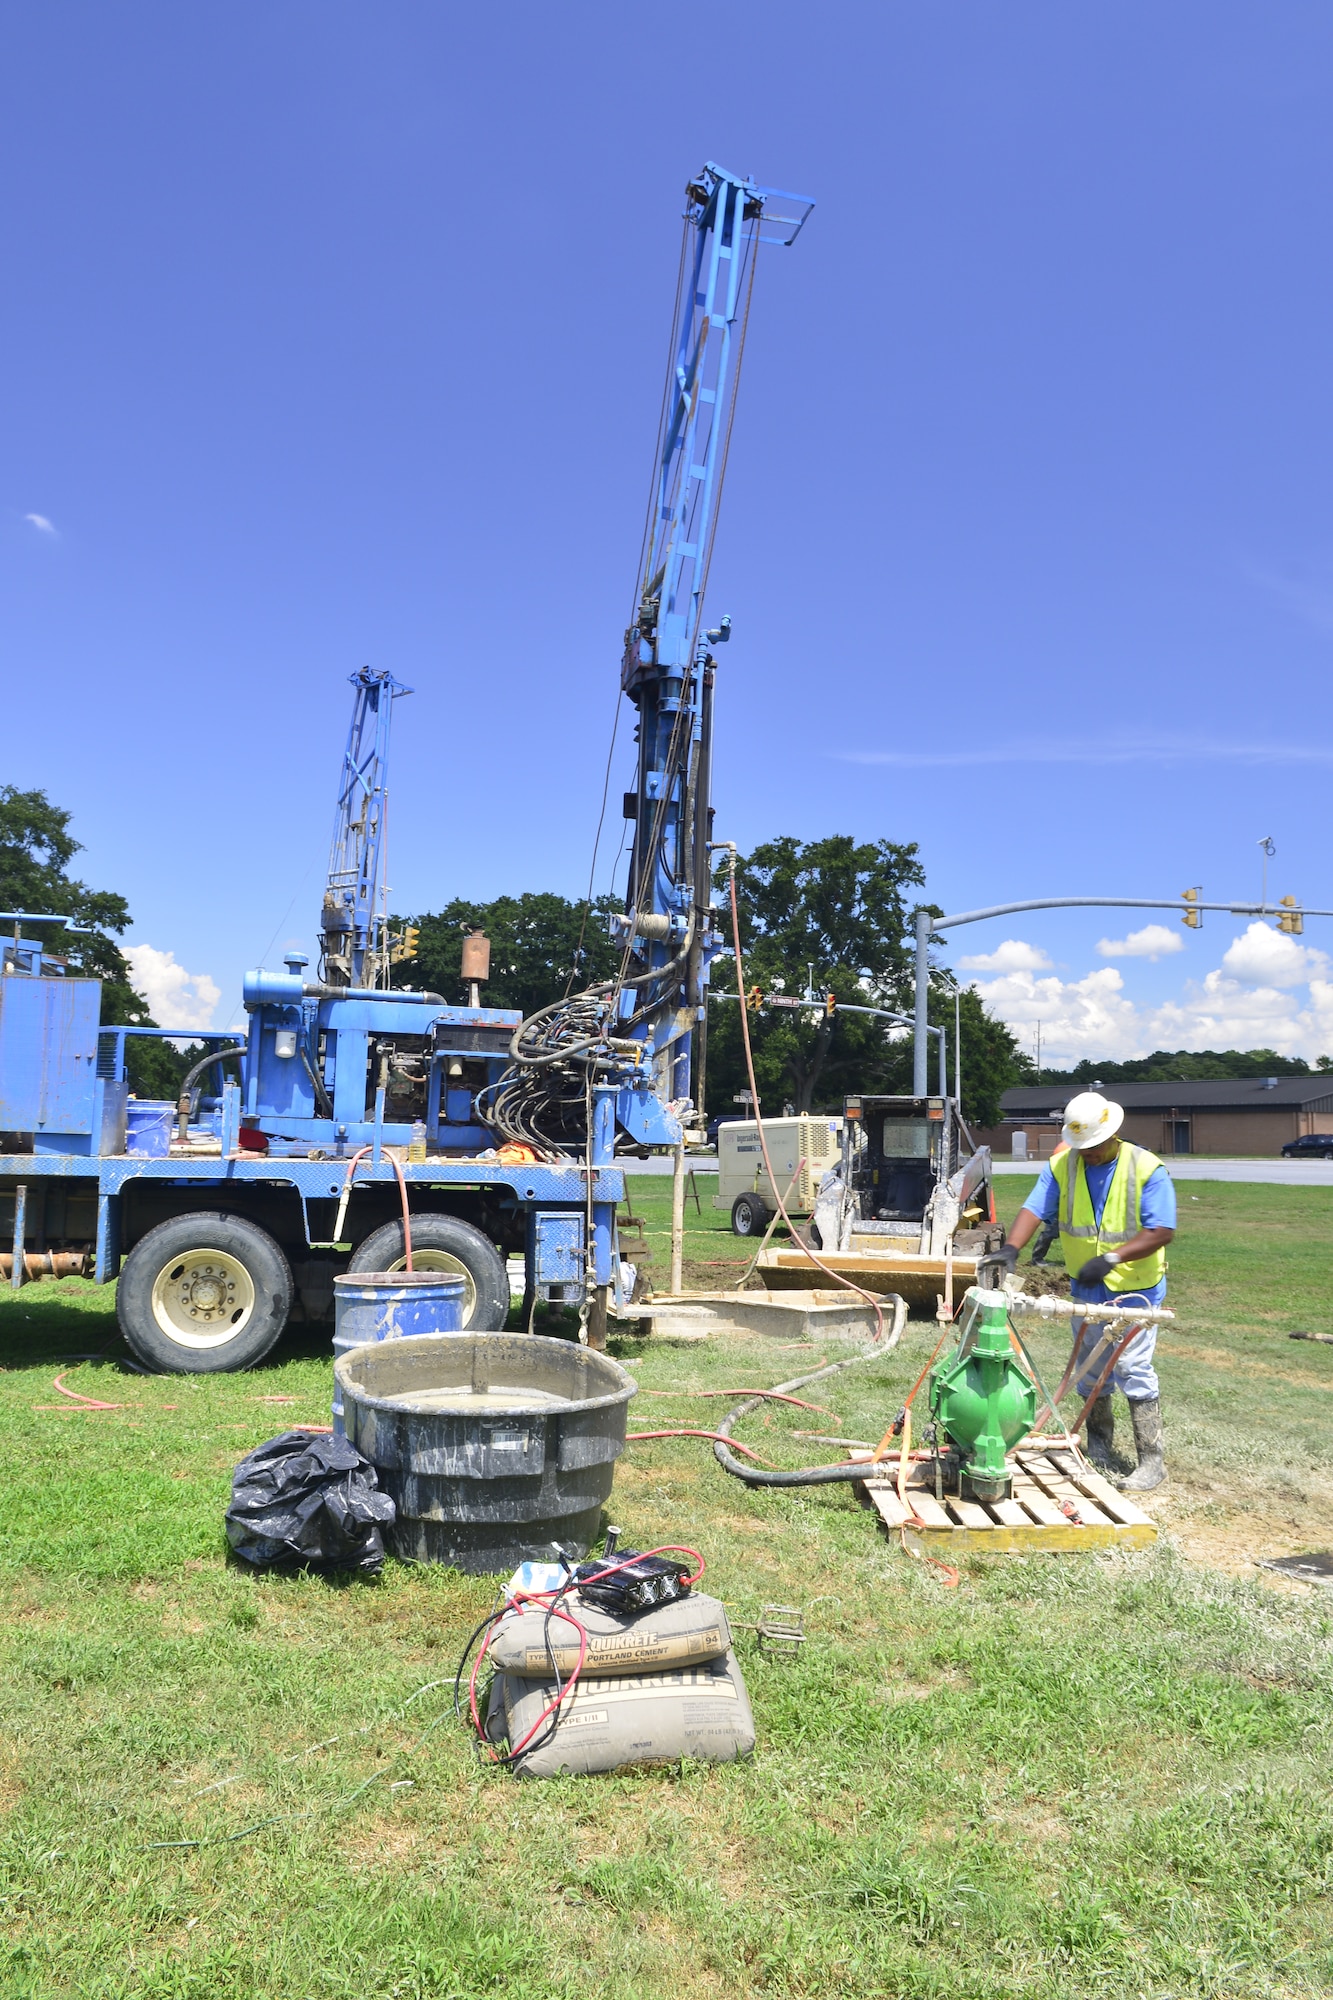 Contractors install wells to treat groundwater contamination along Ninth Street at Robins Air Force Base. Only shallow groundwater was affected by the contamination which did not reach any base drinking water sources. (U.S. Air Force photo by Ed Aspera)